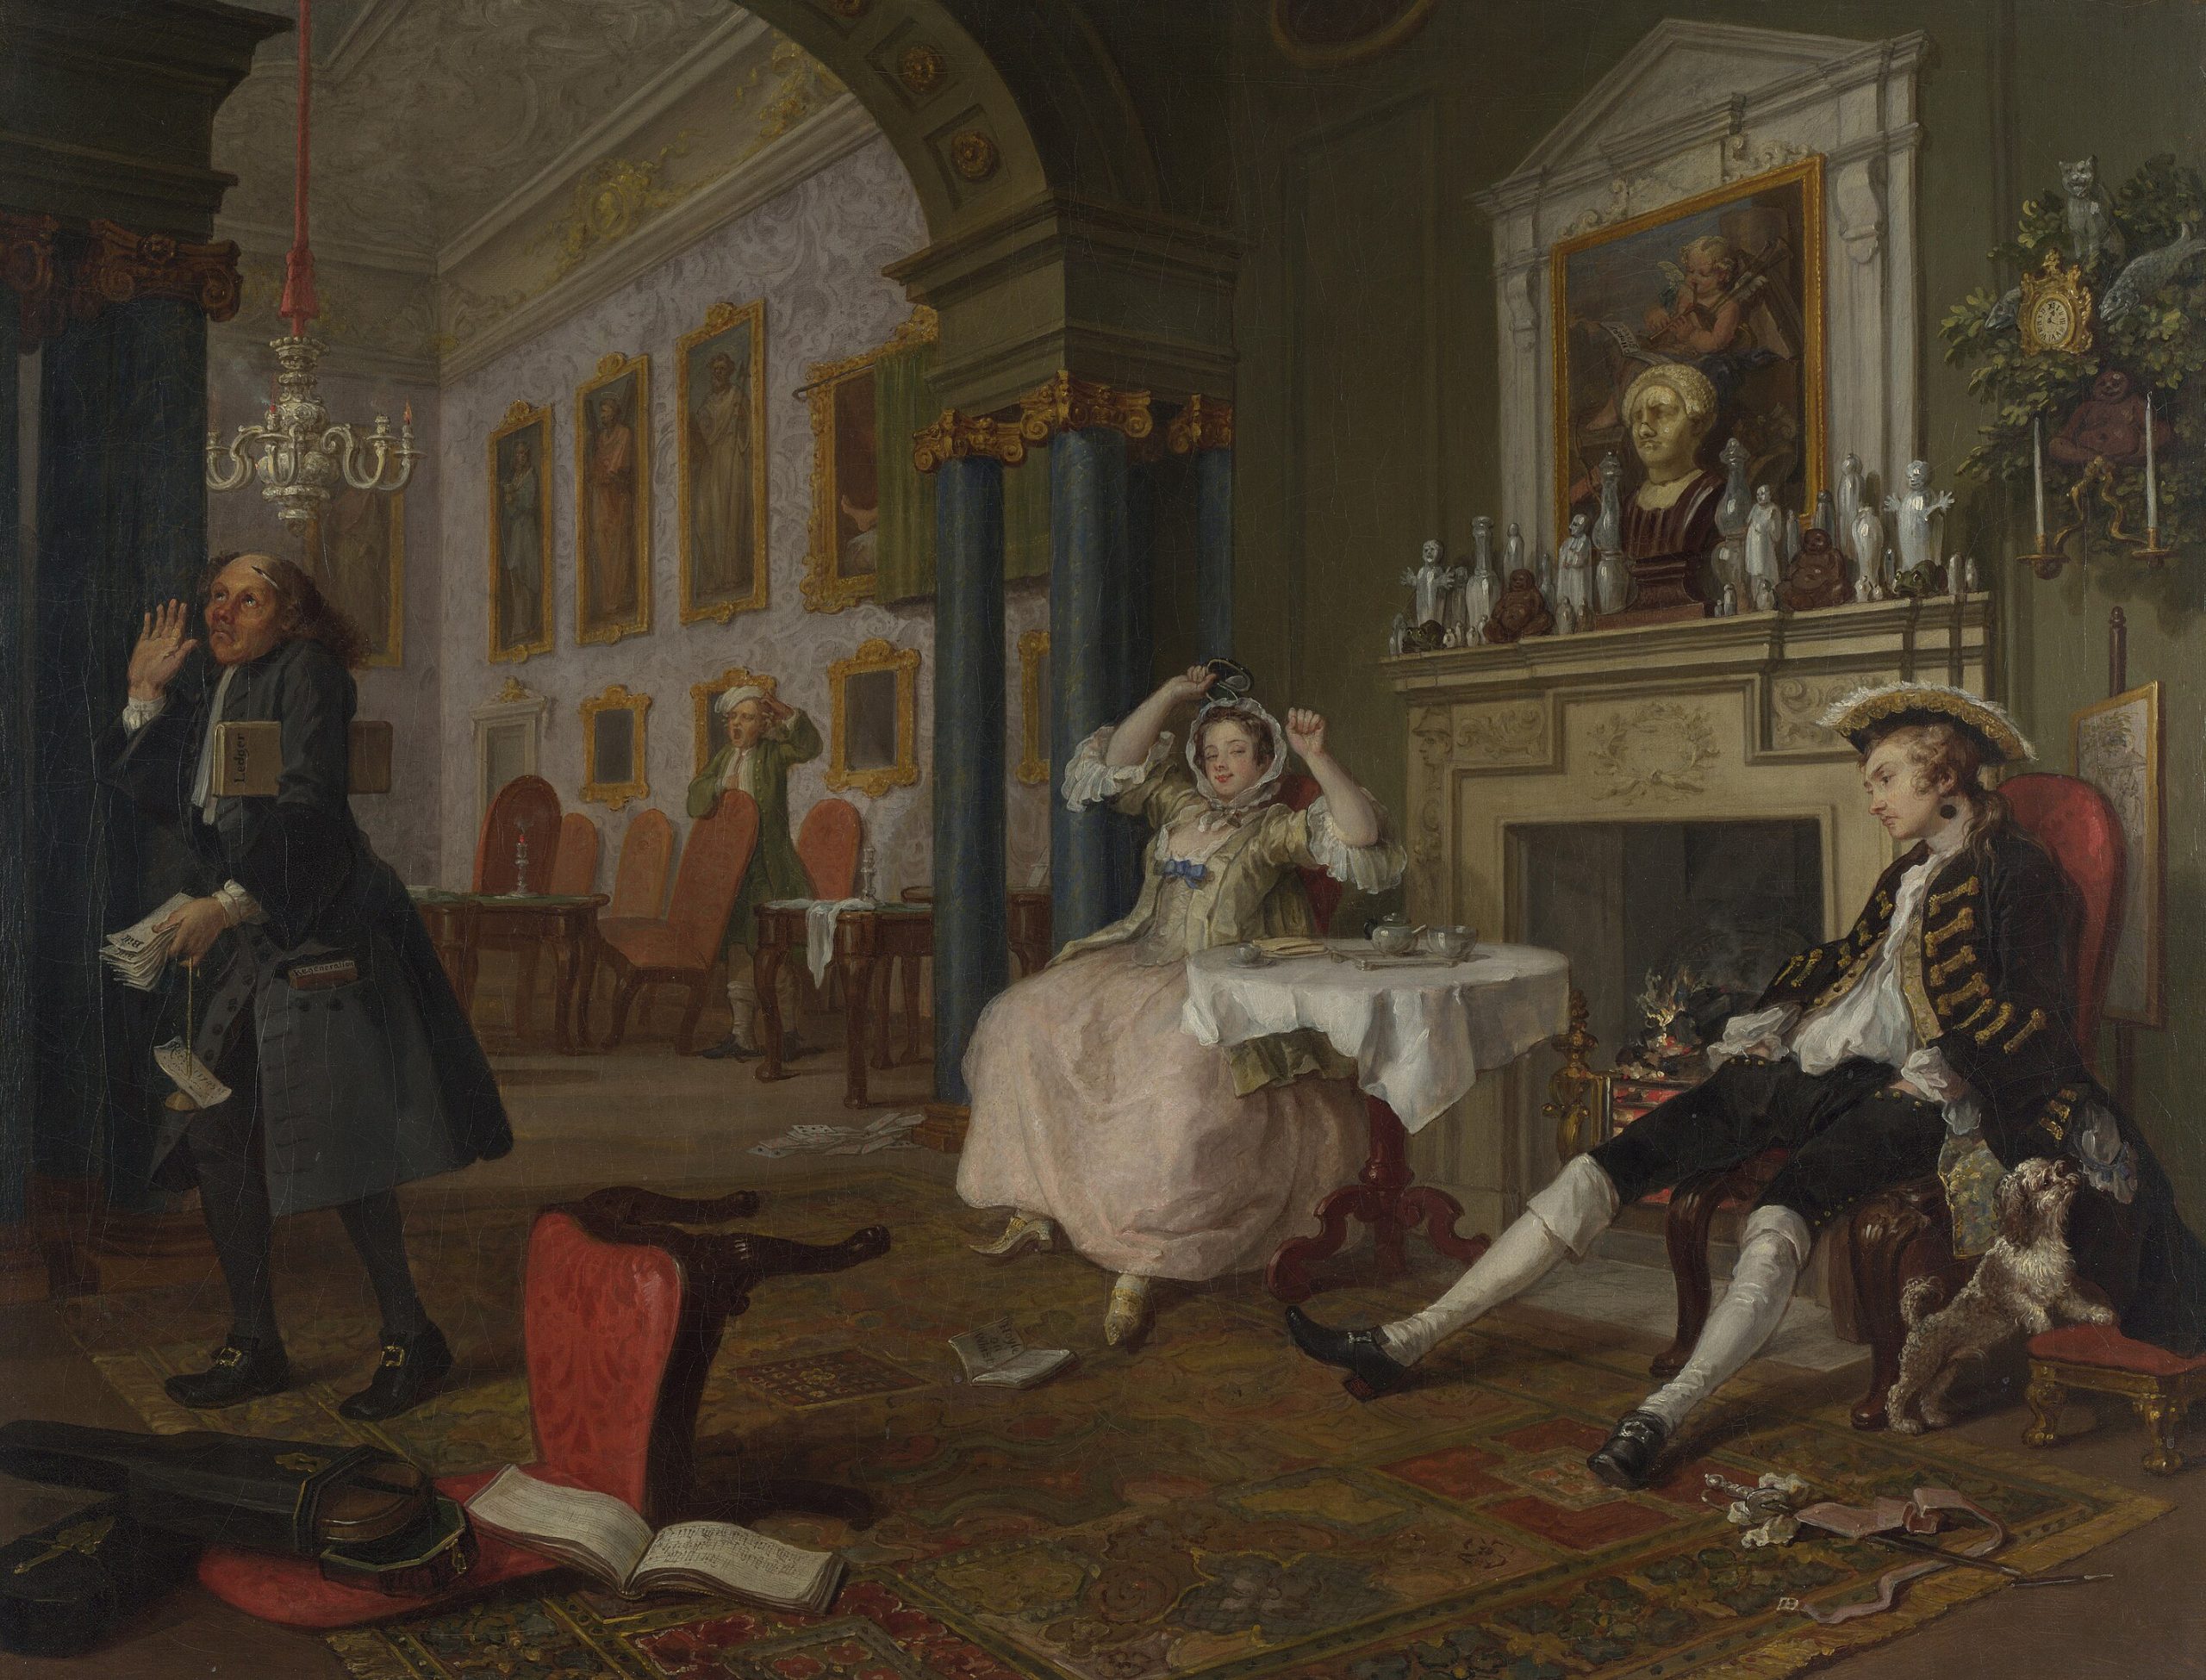 A seated man and woman in a room watching a man whose back is turned towards them shrug his shoulders beside a fallen chair